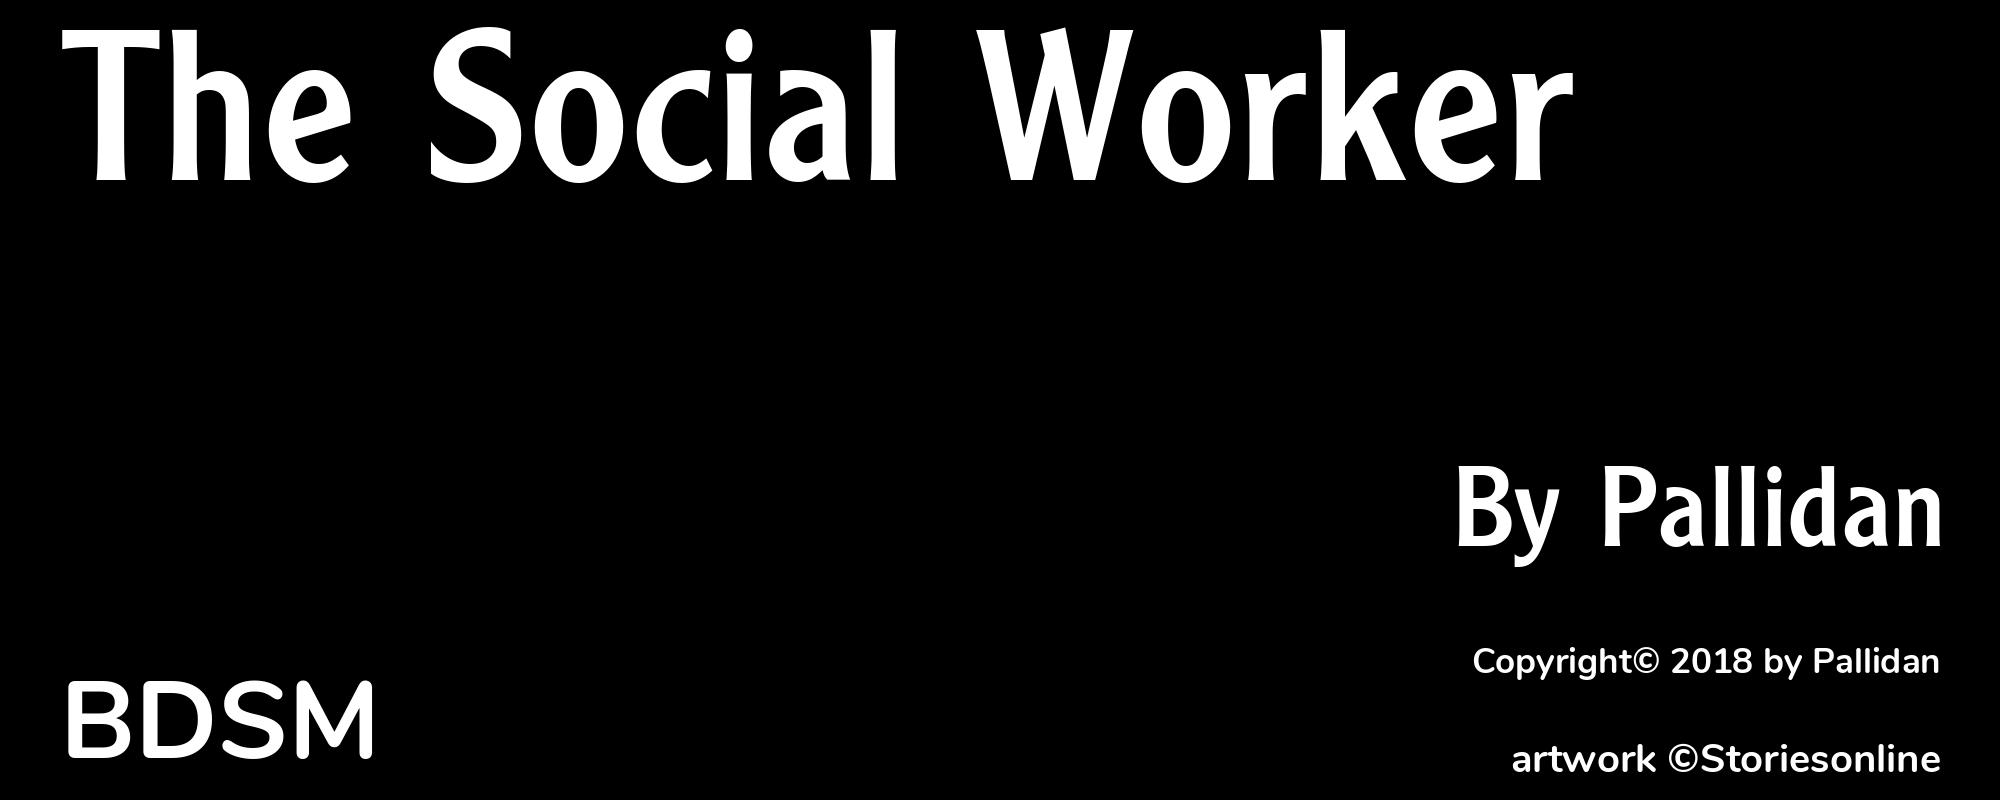 The Social Worker - Cover